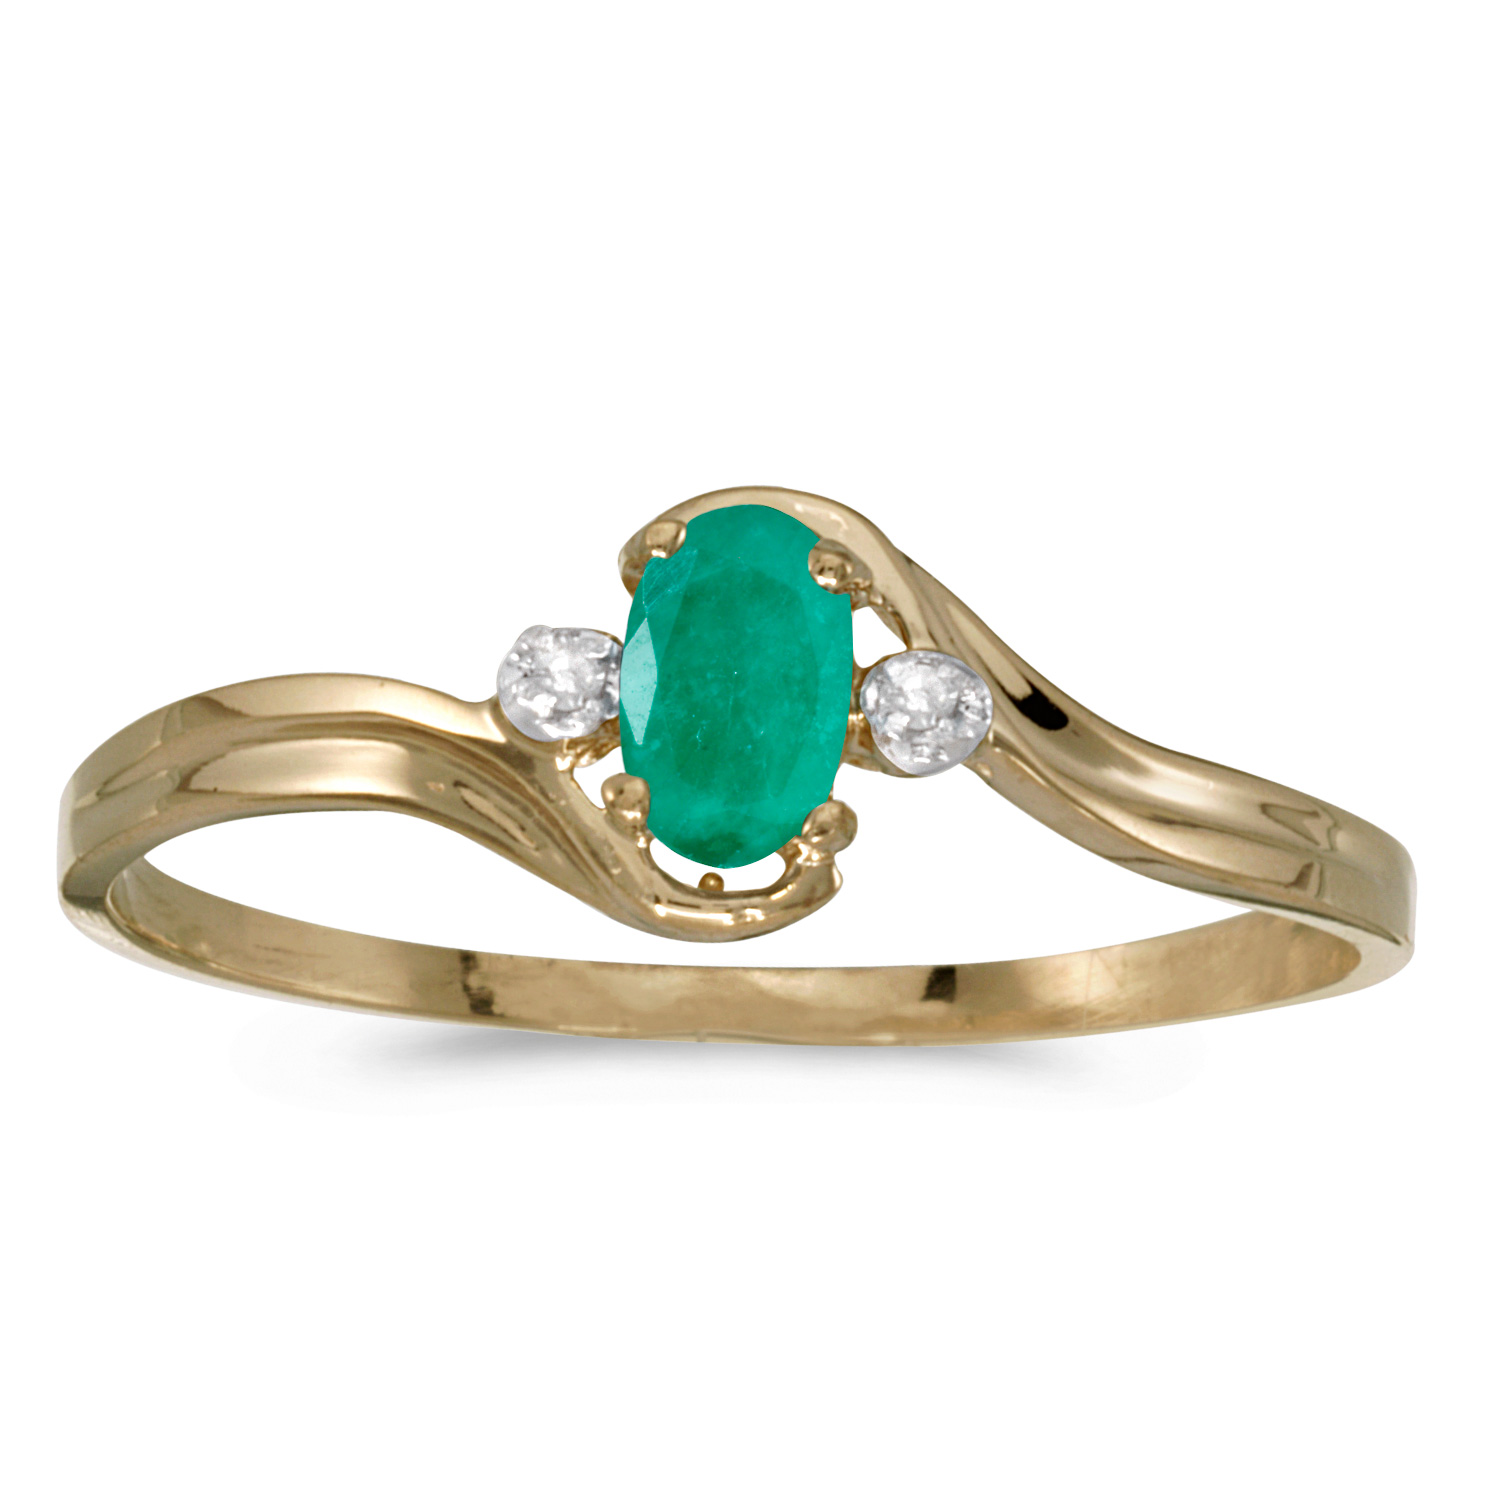 14k Yellow Gold Oval Emerald And Diamond Ring - image 1 of 2